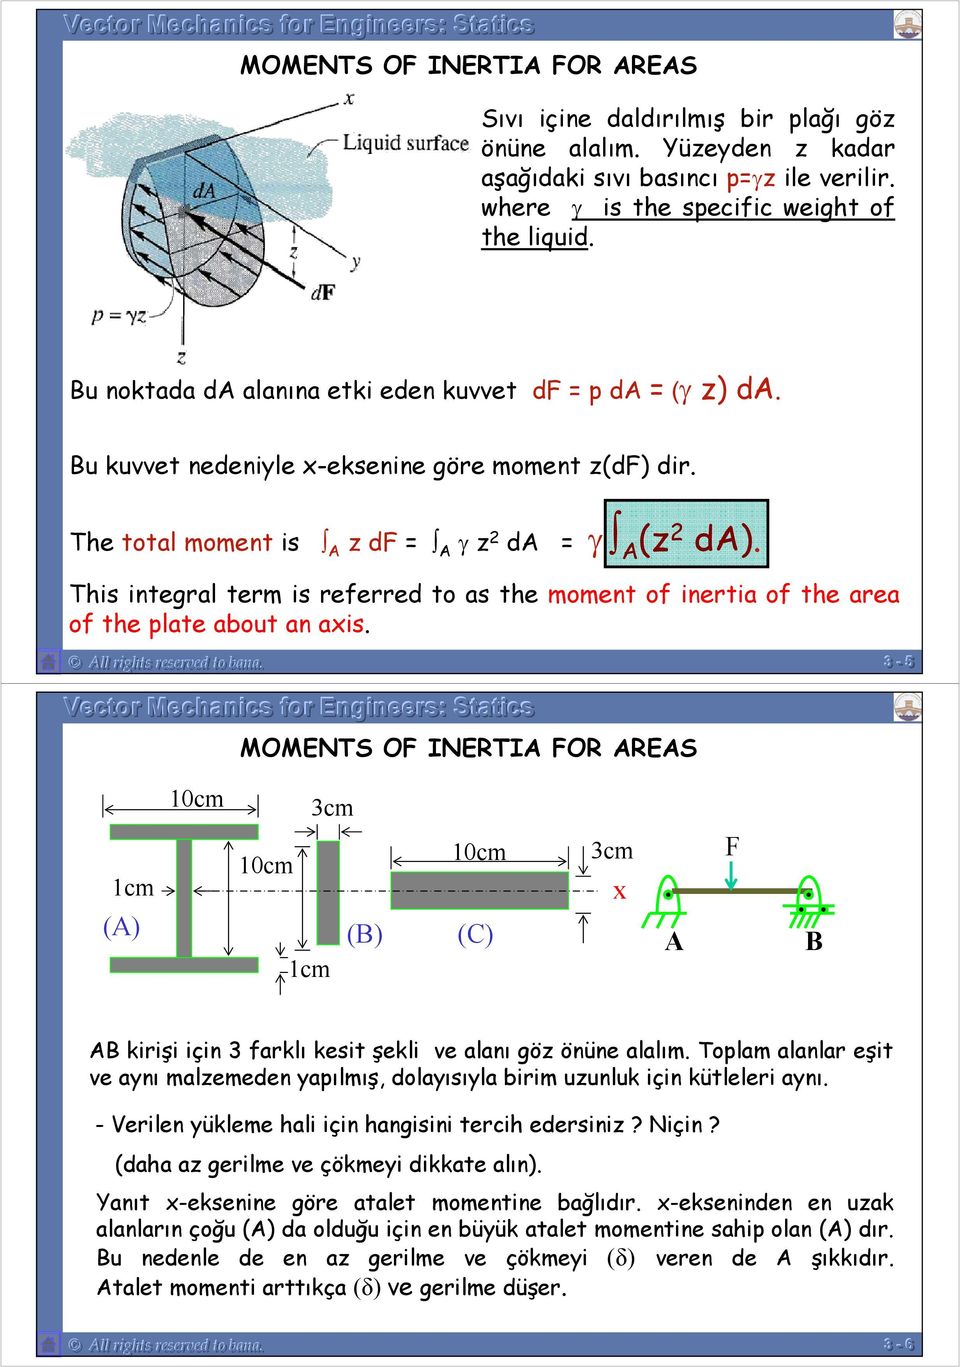 of the area of the plate about an axis All rights reserved to bana -- 55 MOMENTS OF INERTIA FOR AREAS 10cm cm 1cm (A) 10cm 1cm (B) 10cm (C) cm x A F B AB kirişi için farklı kesit şekli ve alanı göz